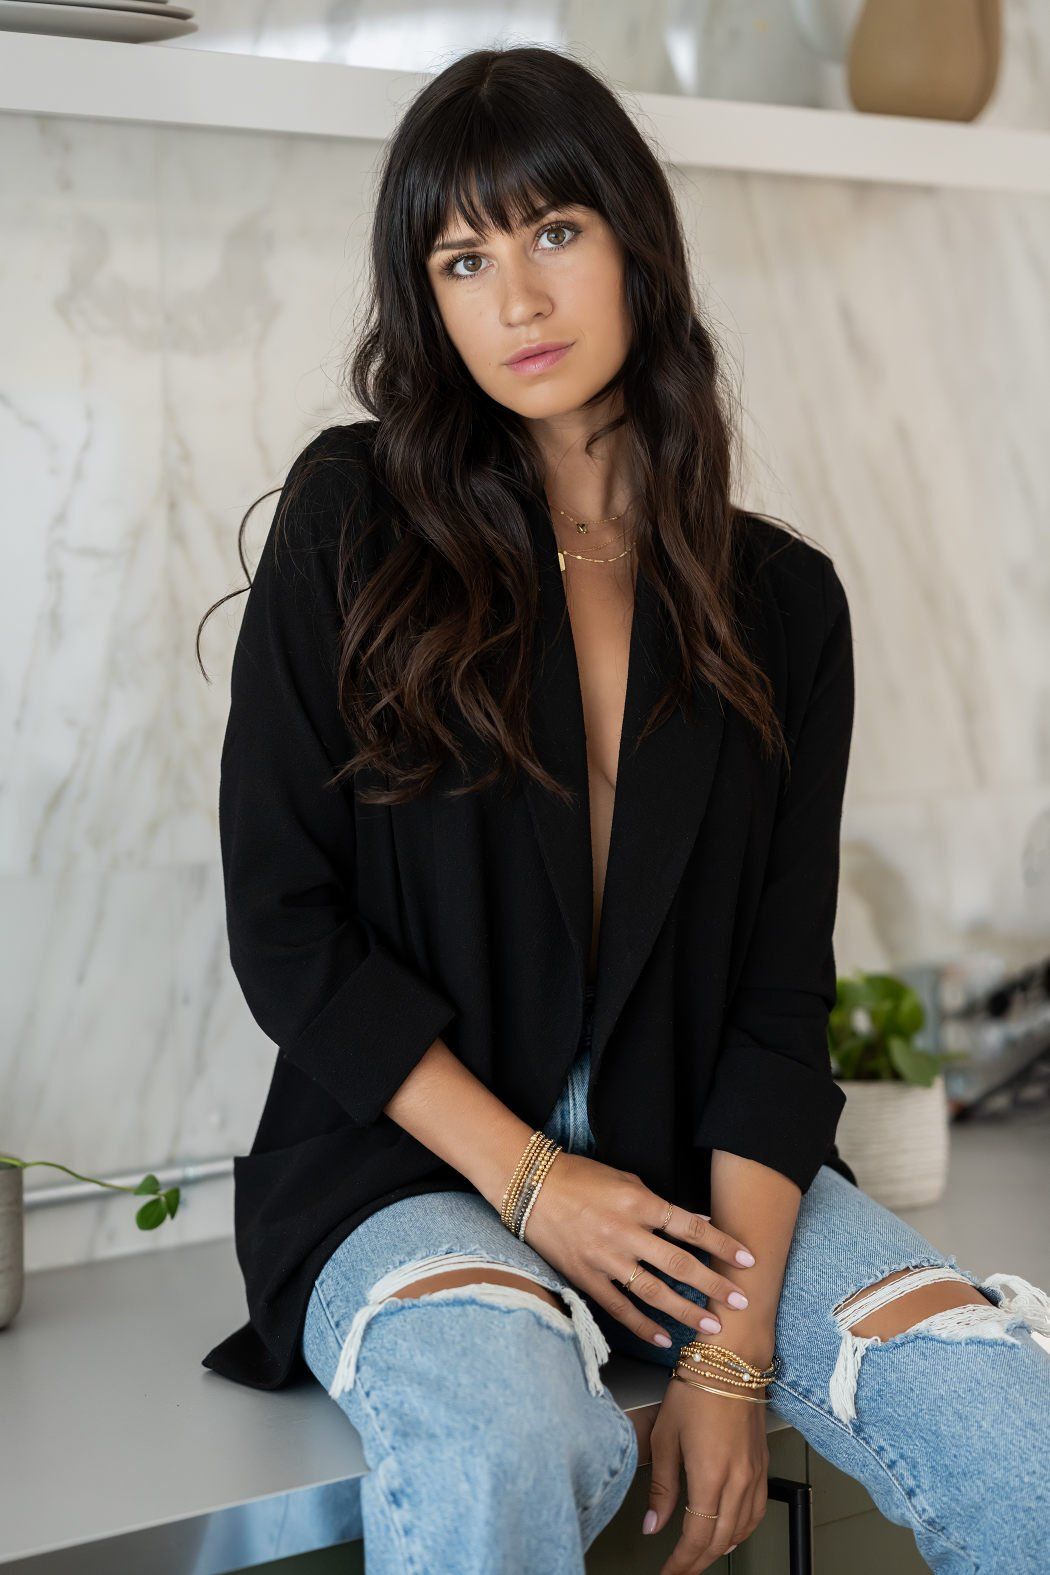 A young woman with wavy hair and heavy bangs wearing distressed jeans and a black blazer sitting on a kitchen counter with marble walls